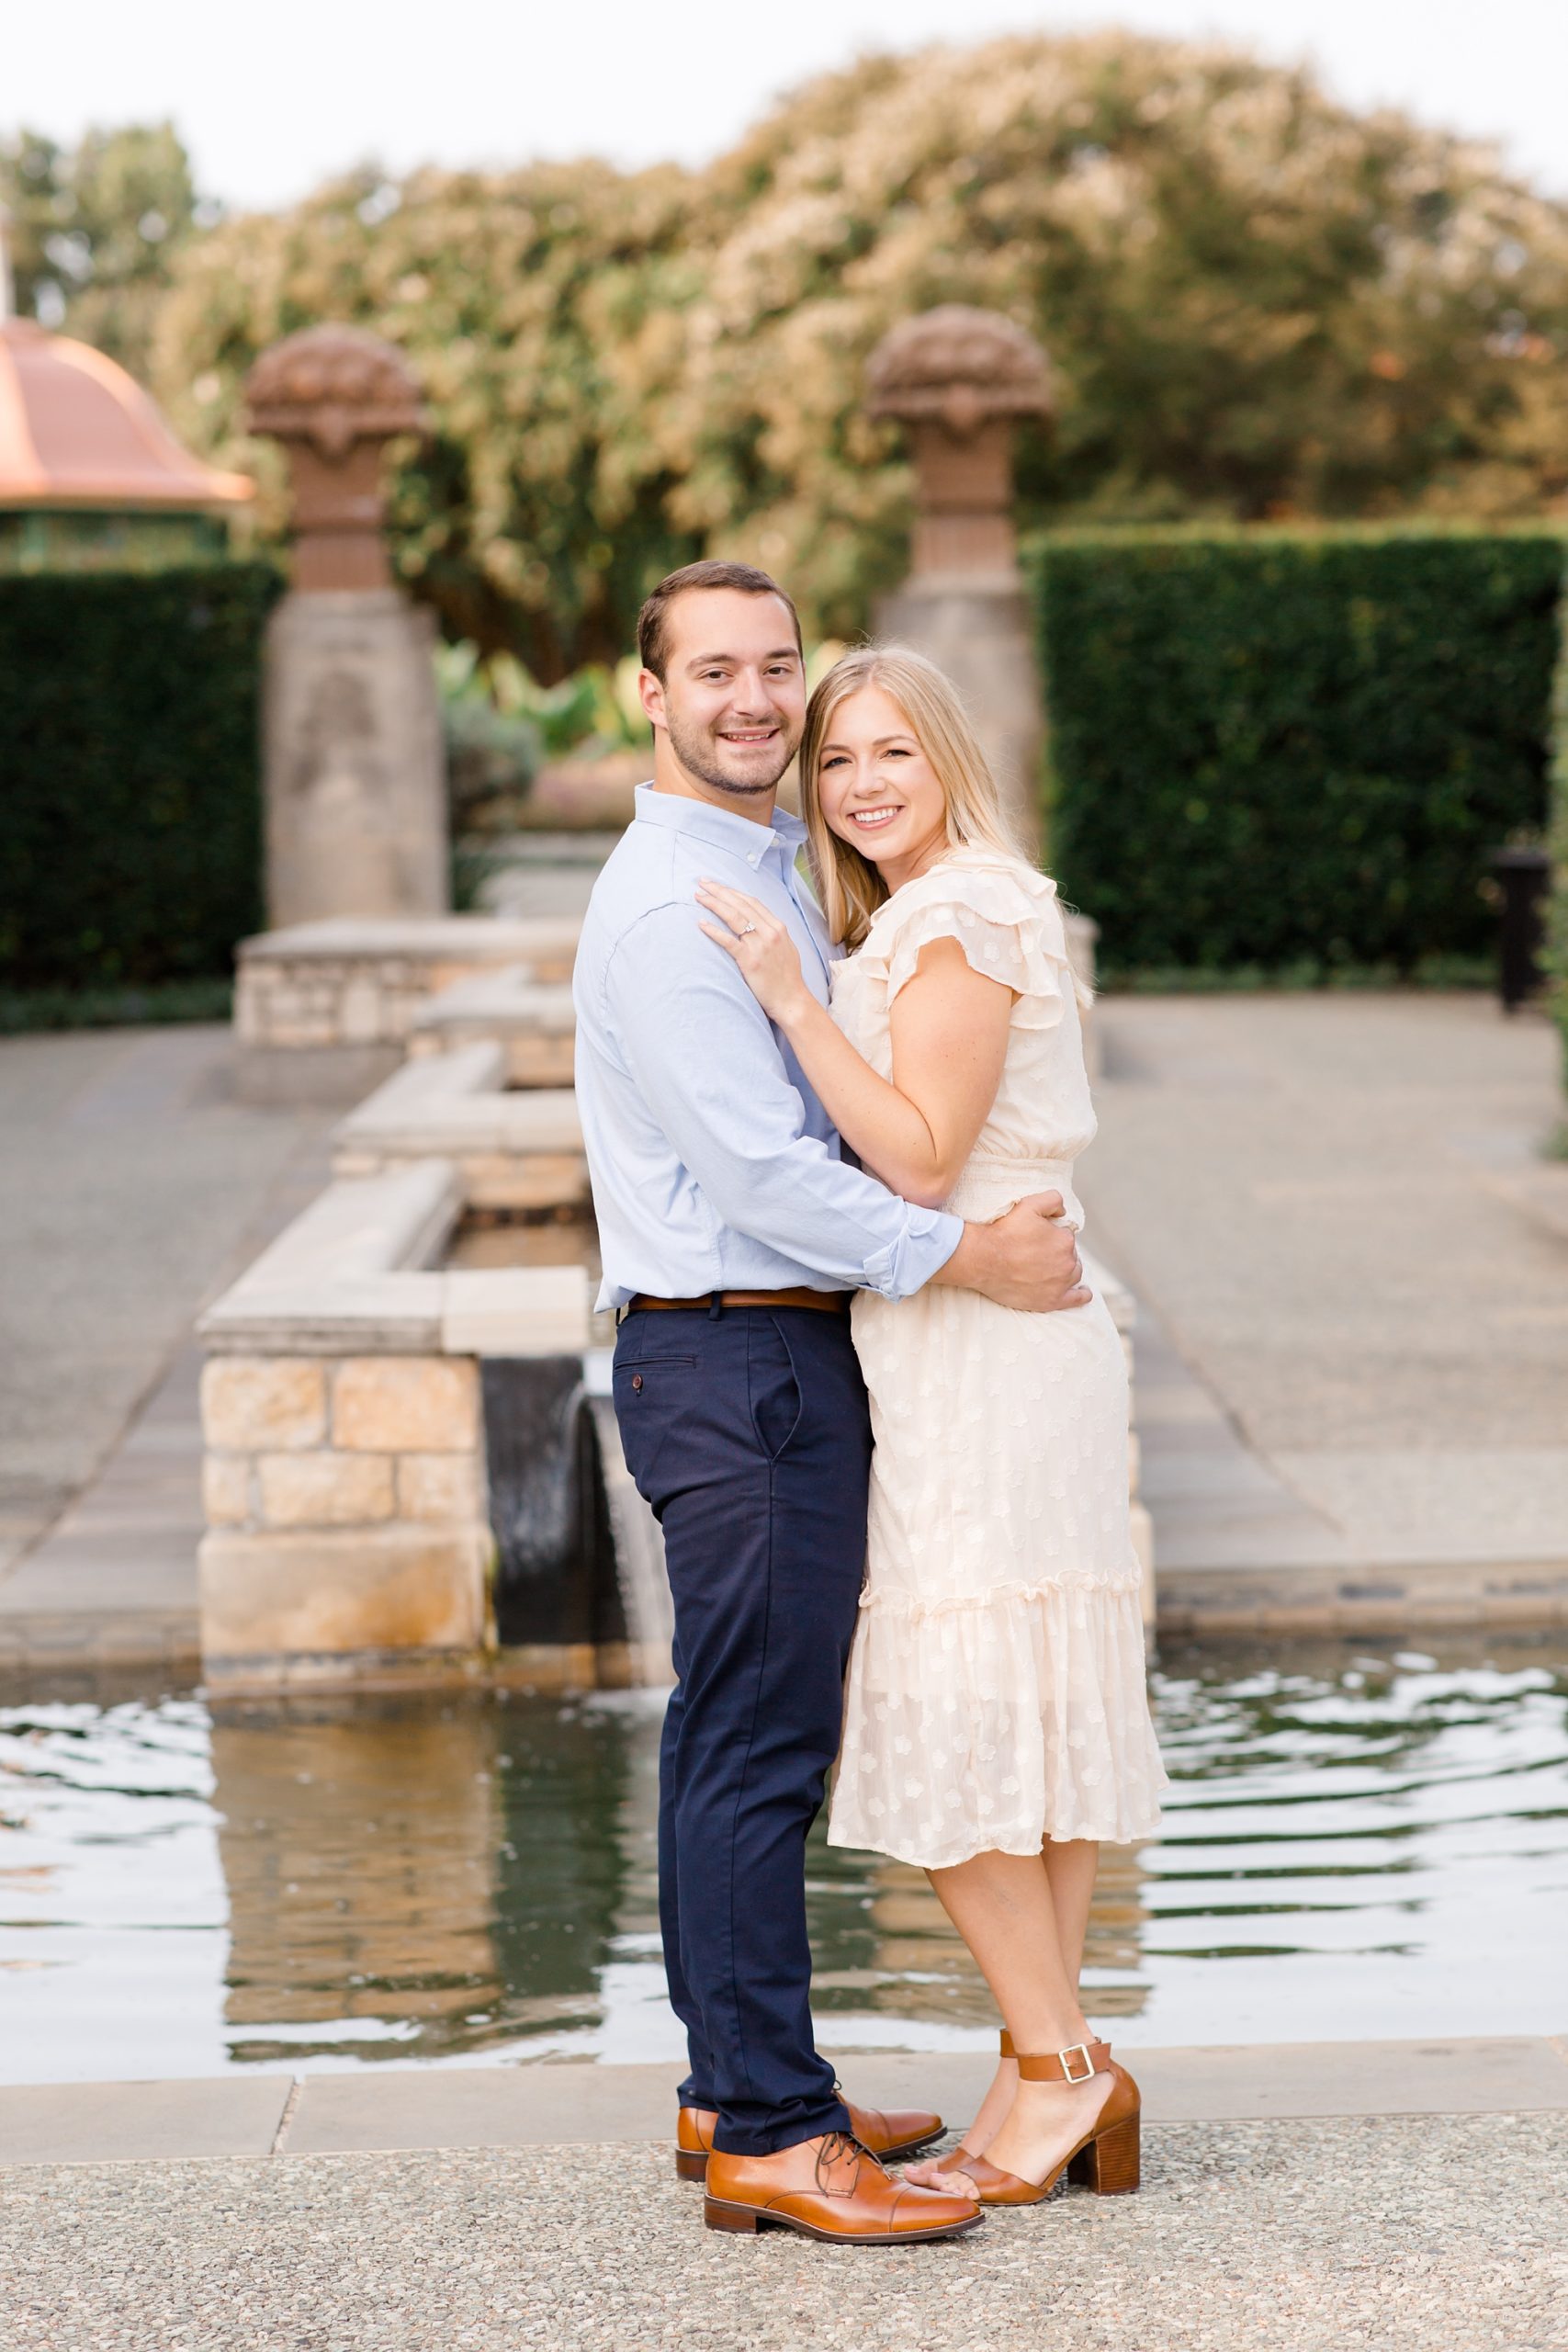 Dallas Arboretum engagement session with young couple